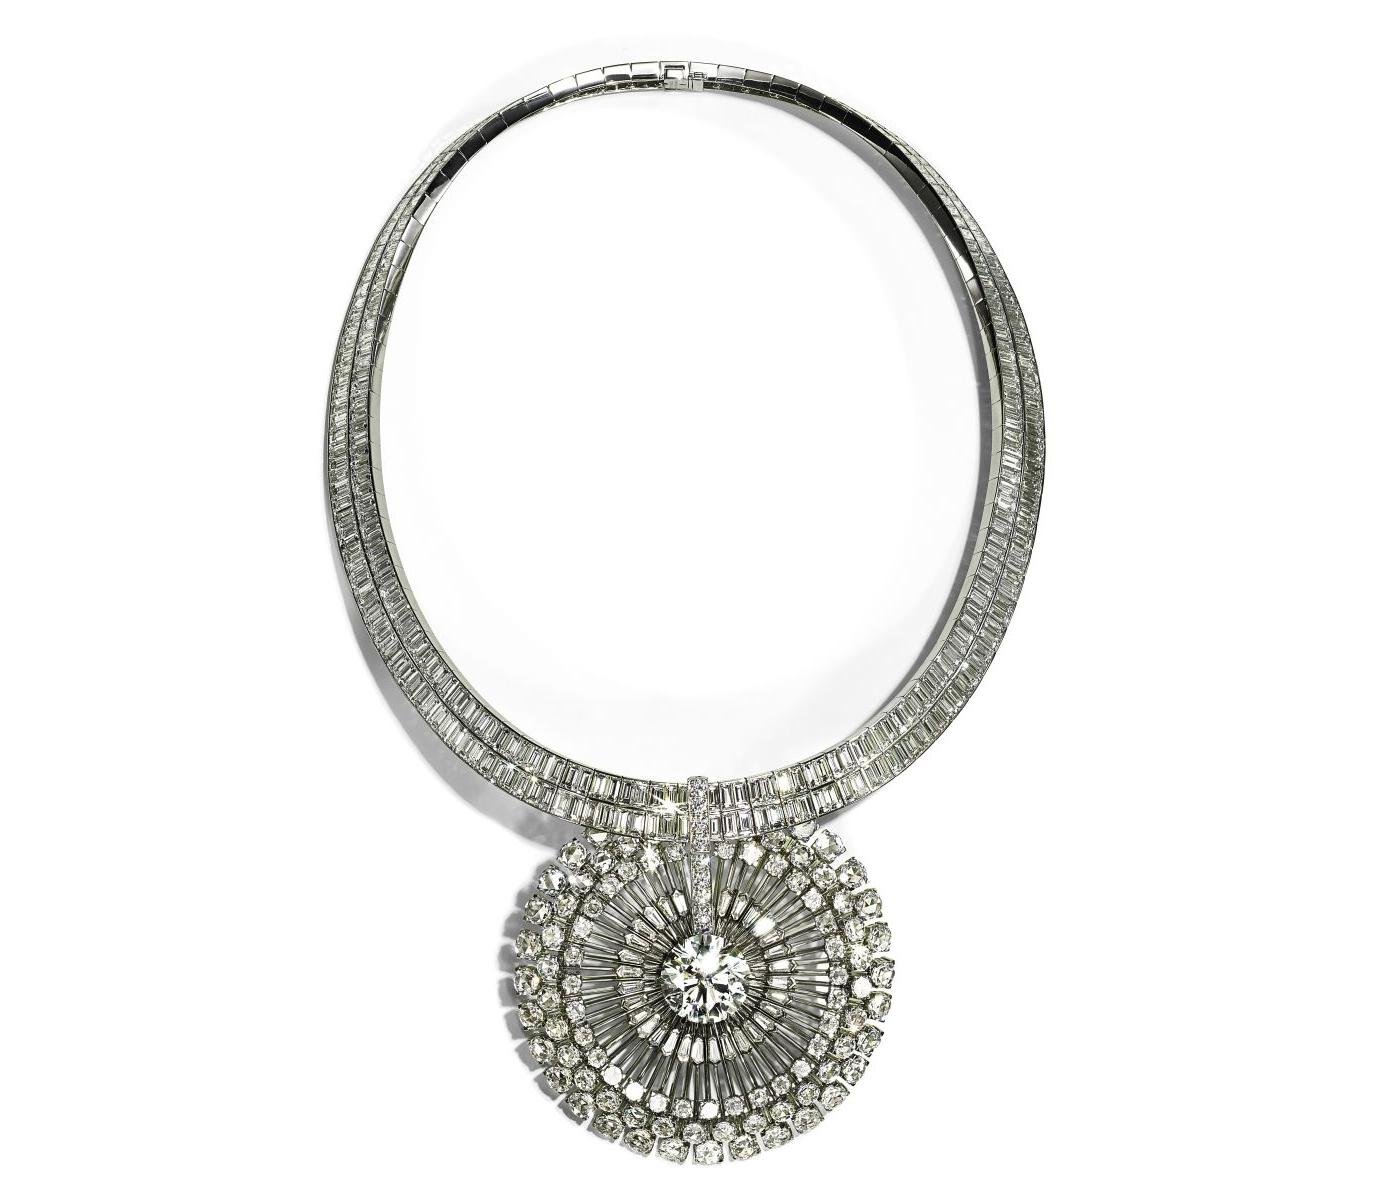 Necklace by Tiffany & Co. 